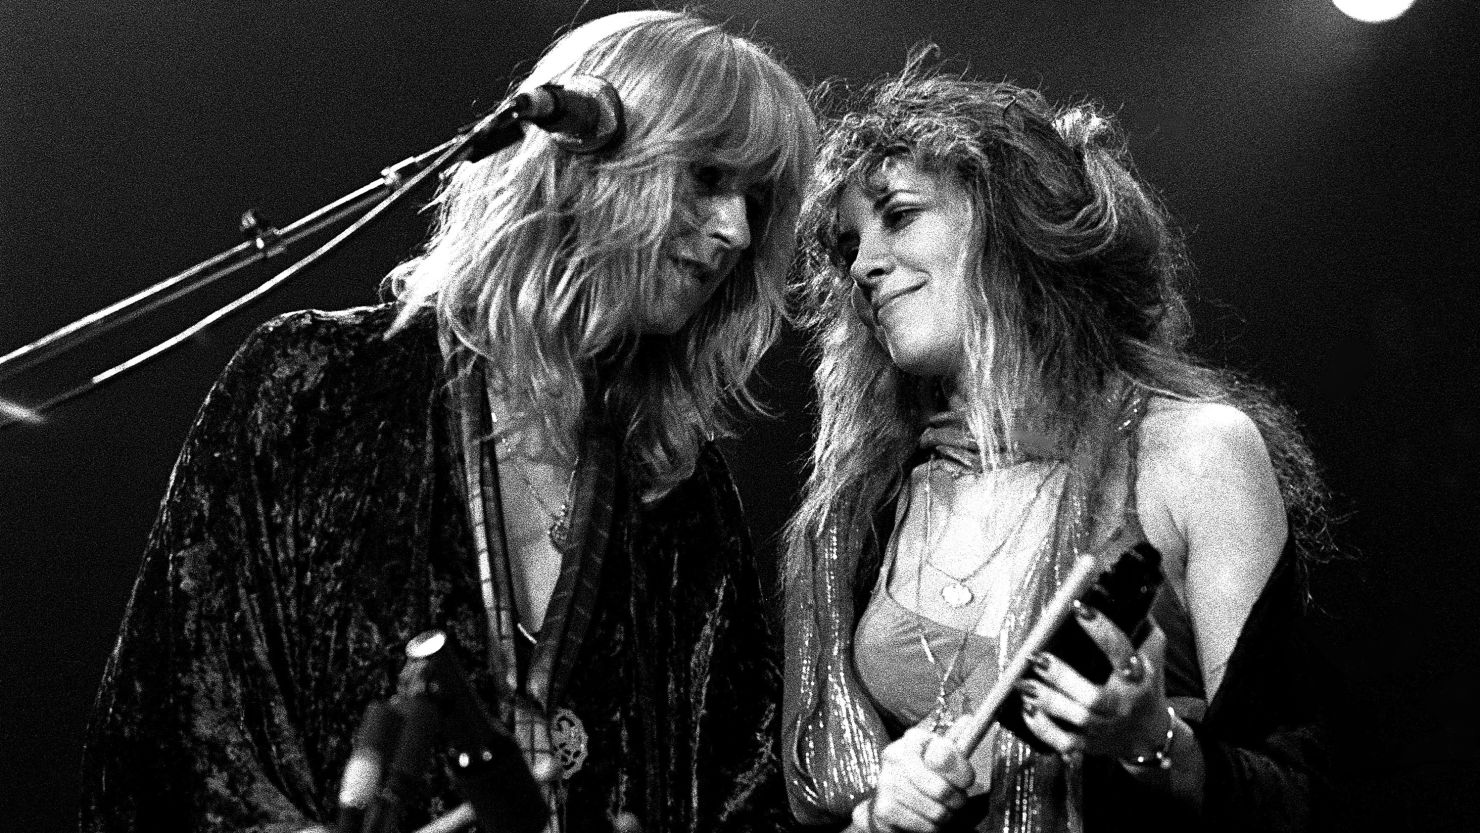 Christine McVie (left) and Stevie Nicks, pictured performing in 1977, had the most stable relationship in Fleetwood Mac. Revisit the musicians' decades-long friendship.